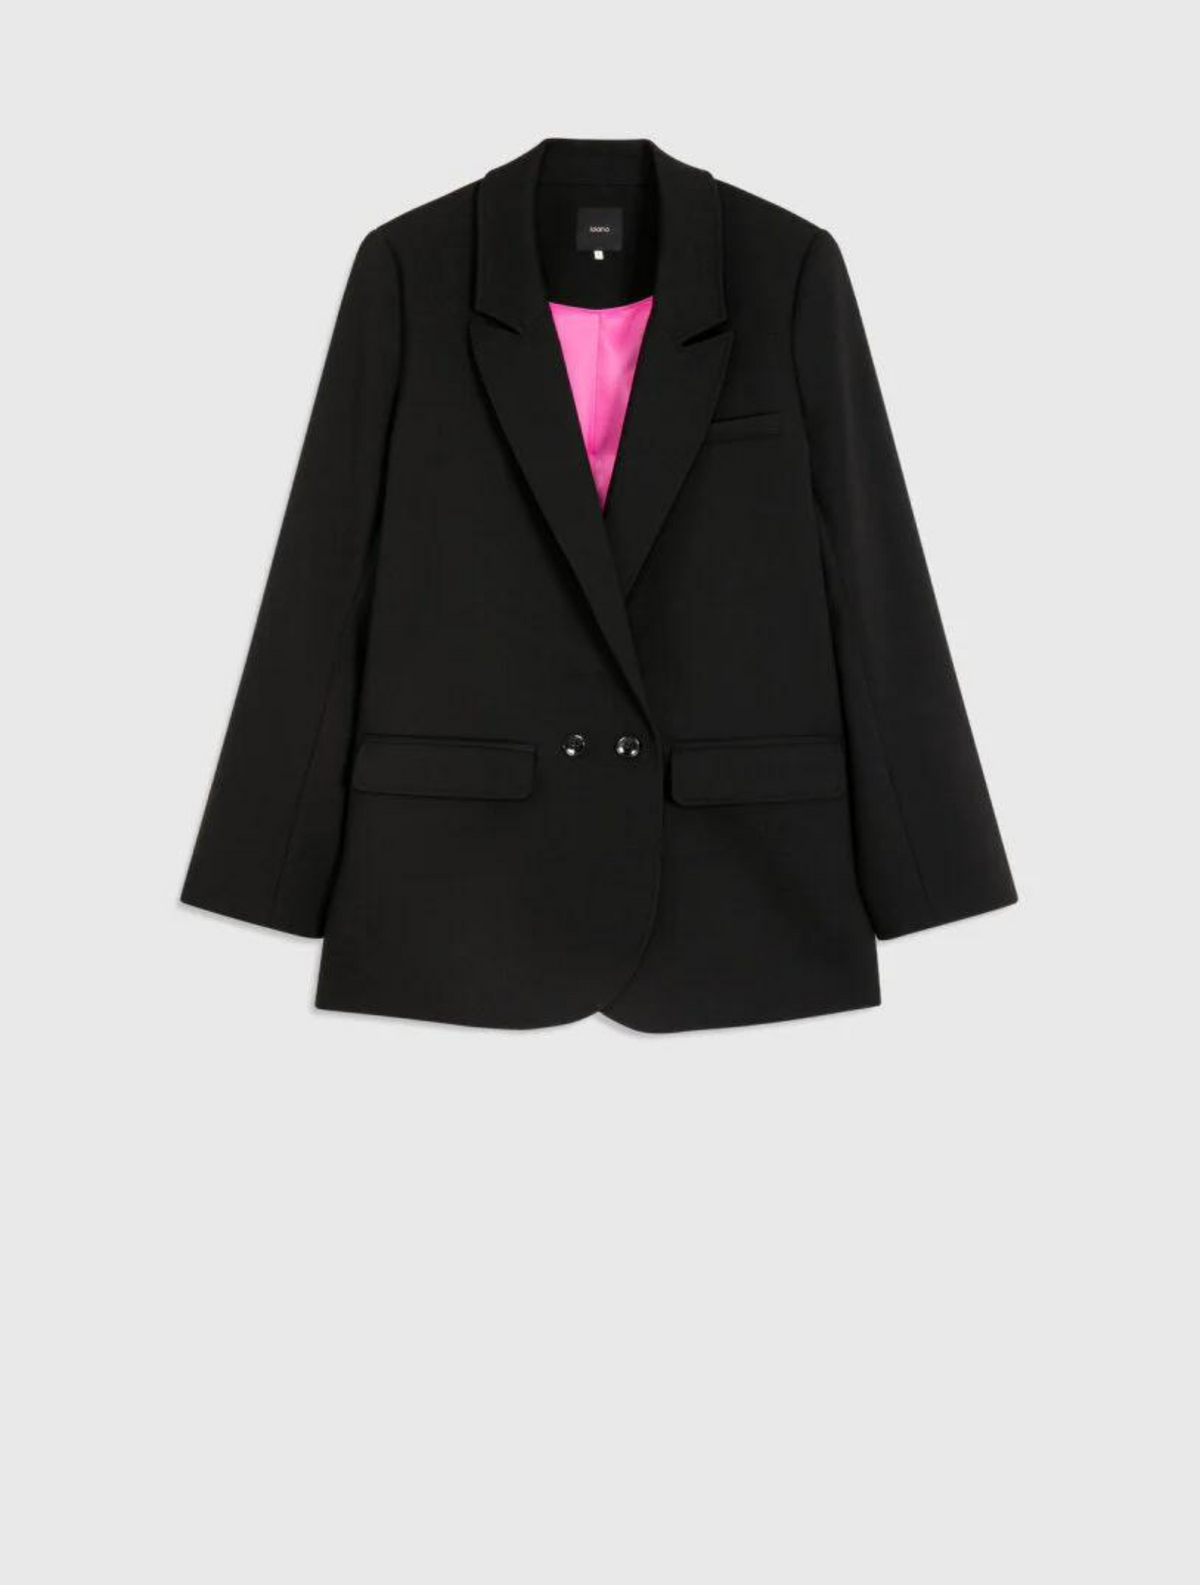 Black shallow double breasted blazer with peak lapel